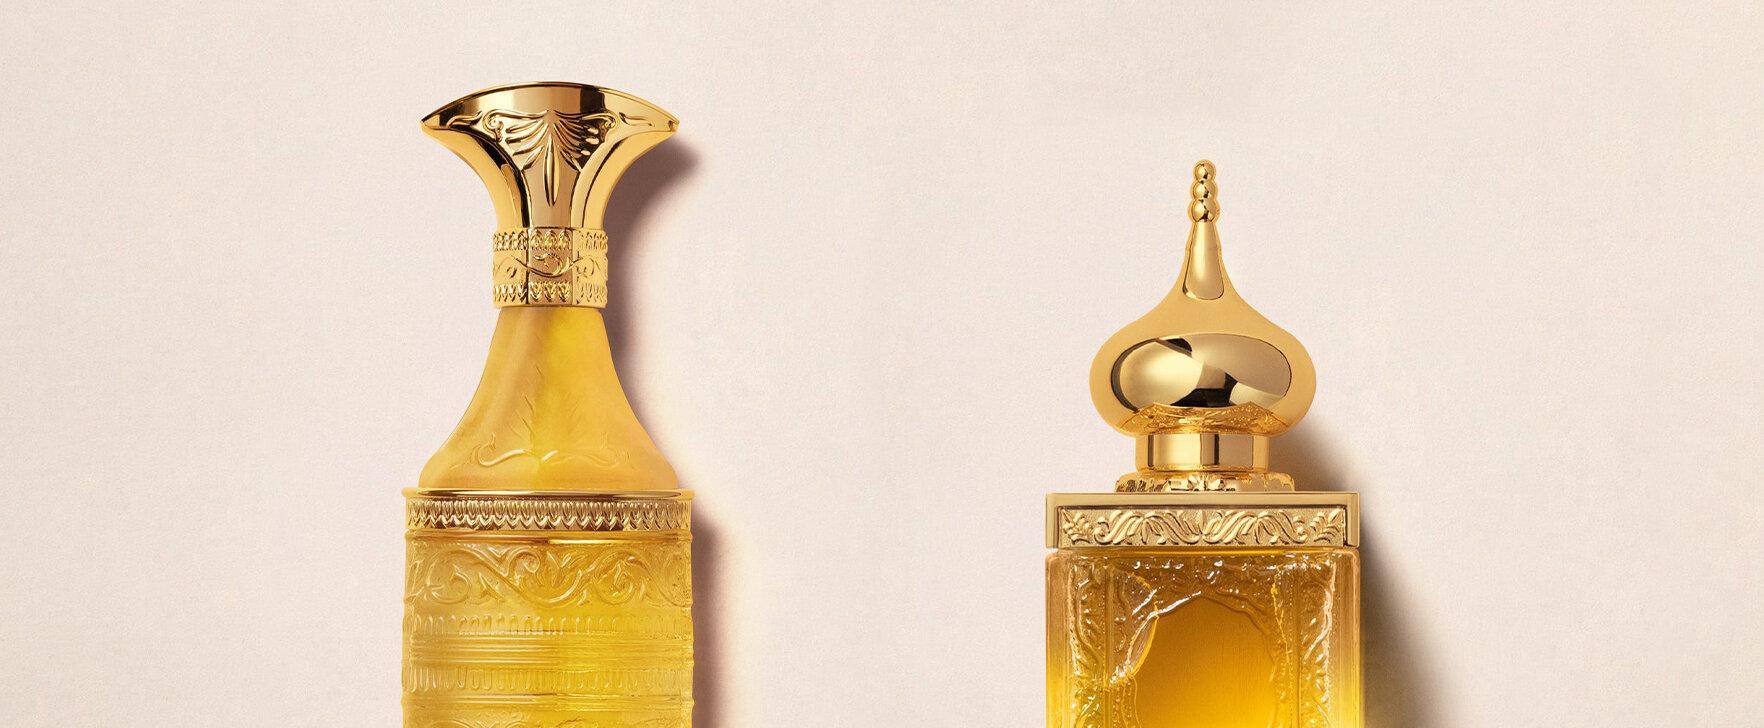 40 Years of High Perfumery: The Limited-edition Fragrance Duo Cristal & Gold by Amouage